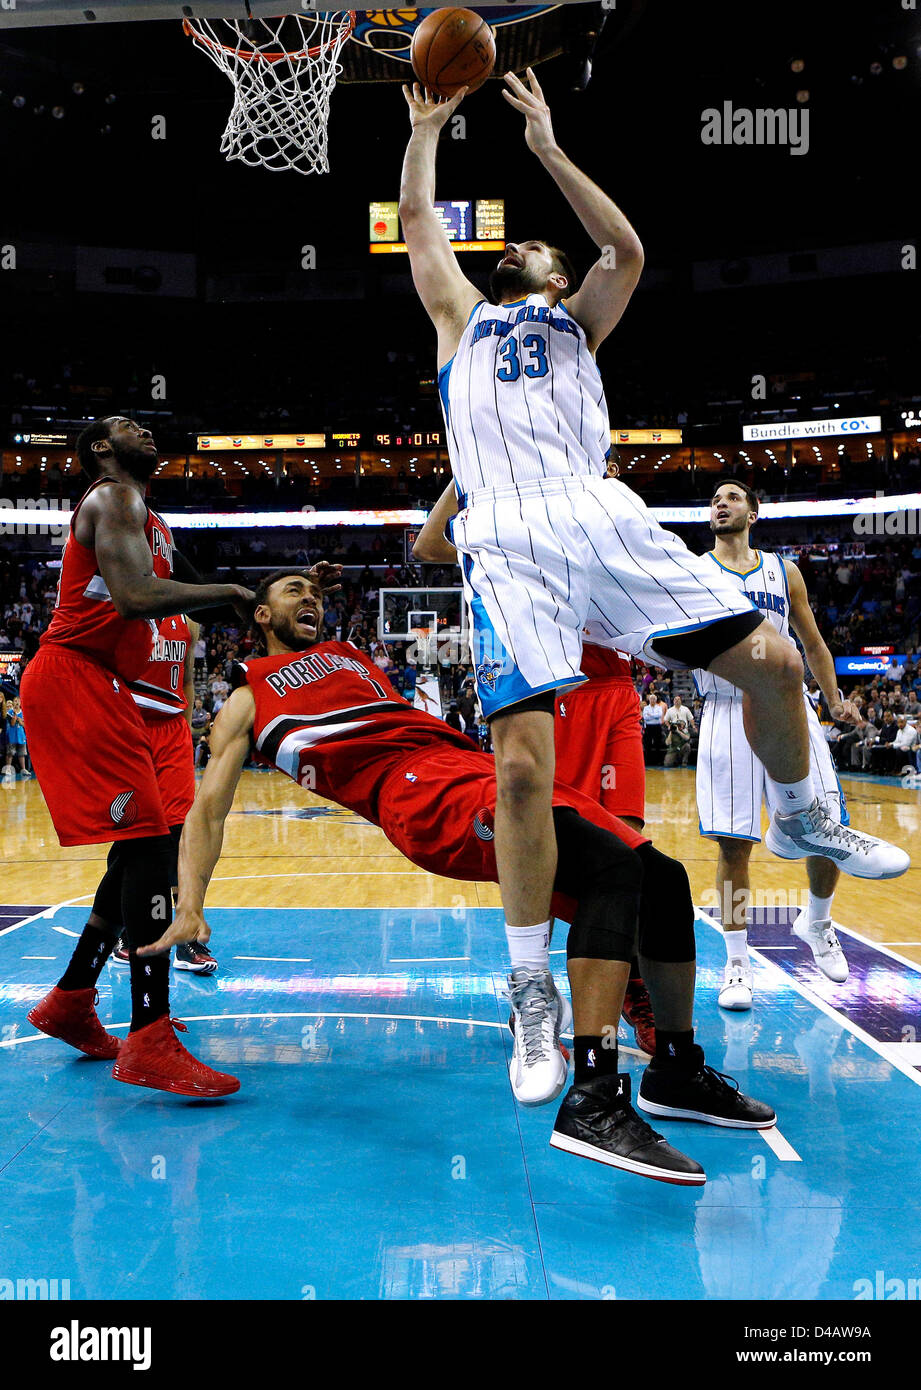 Orlando Magic forward Grant Hill (33) scores on a fast break dunk for two  of his 13 points in the second half against the Washington Wizards on April  17, 2007 at Verizon